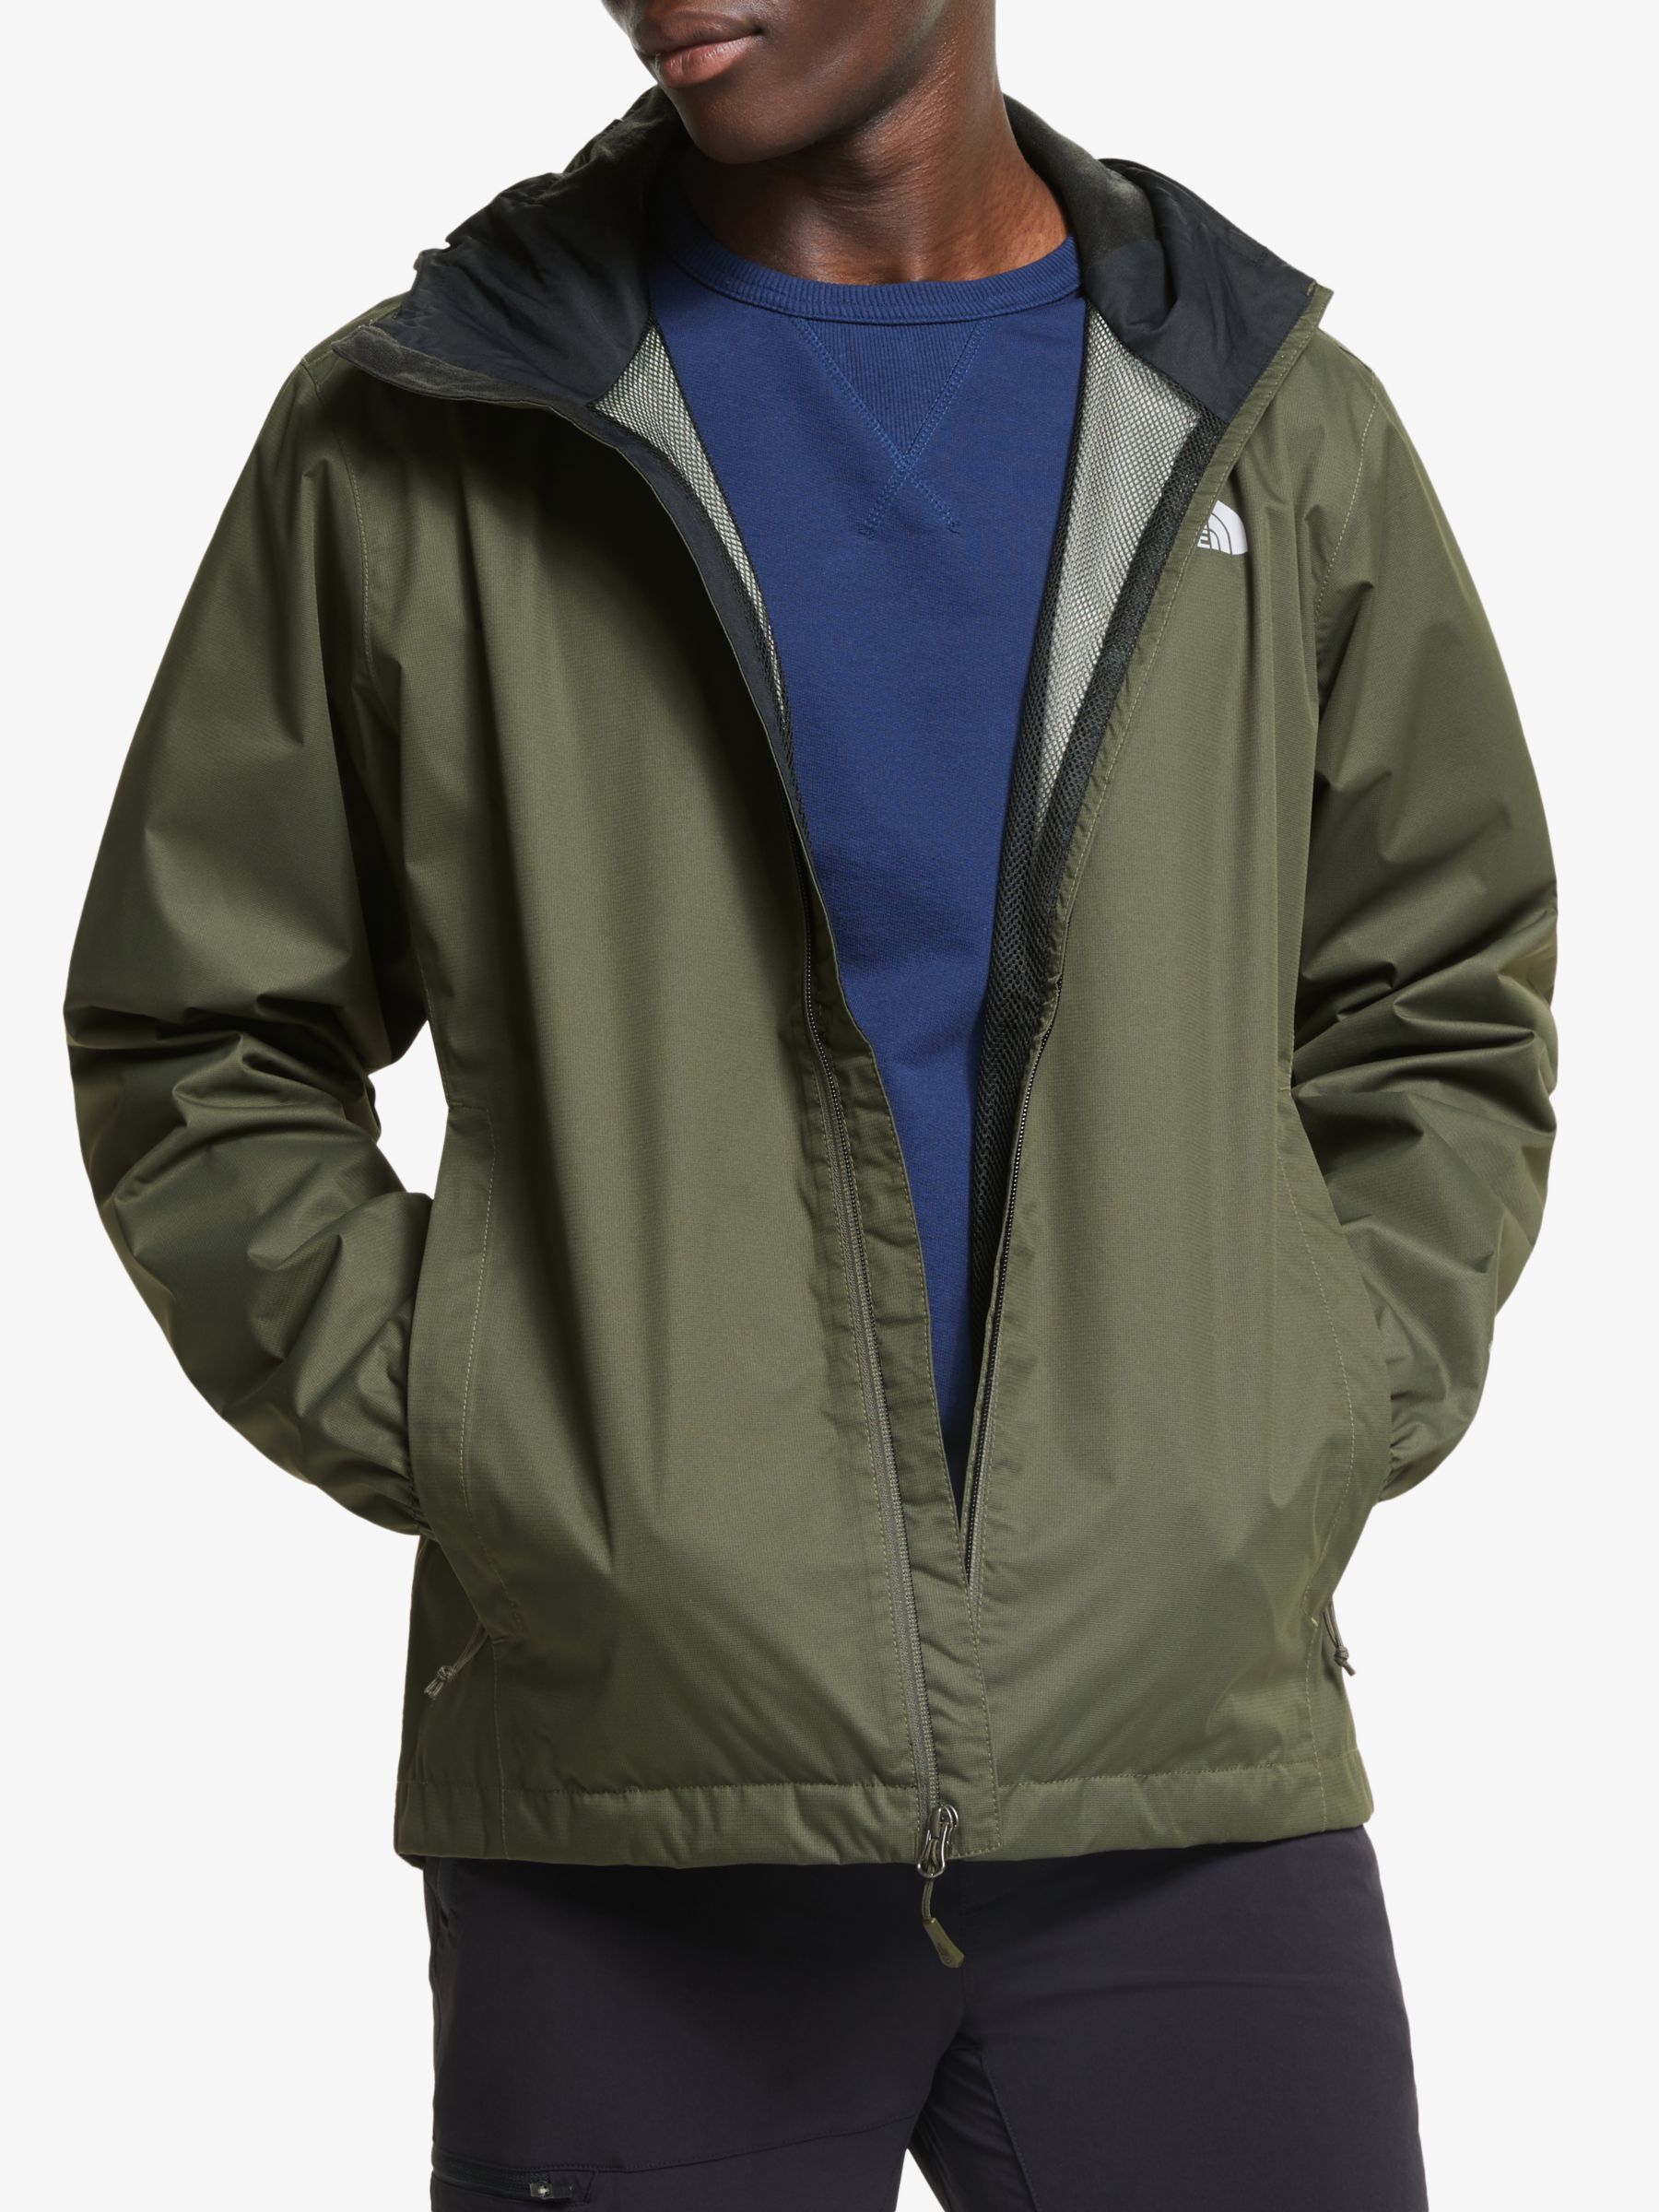 the north face quest jacket green